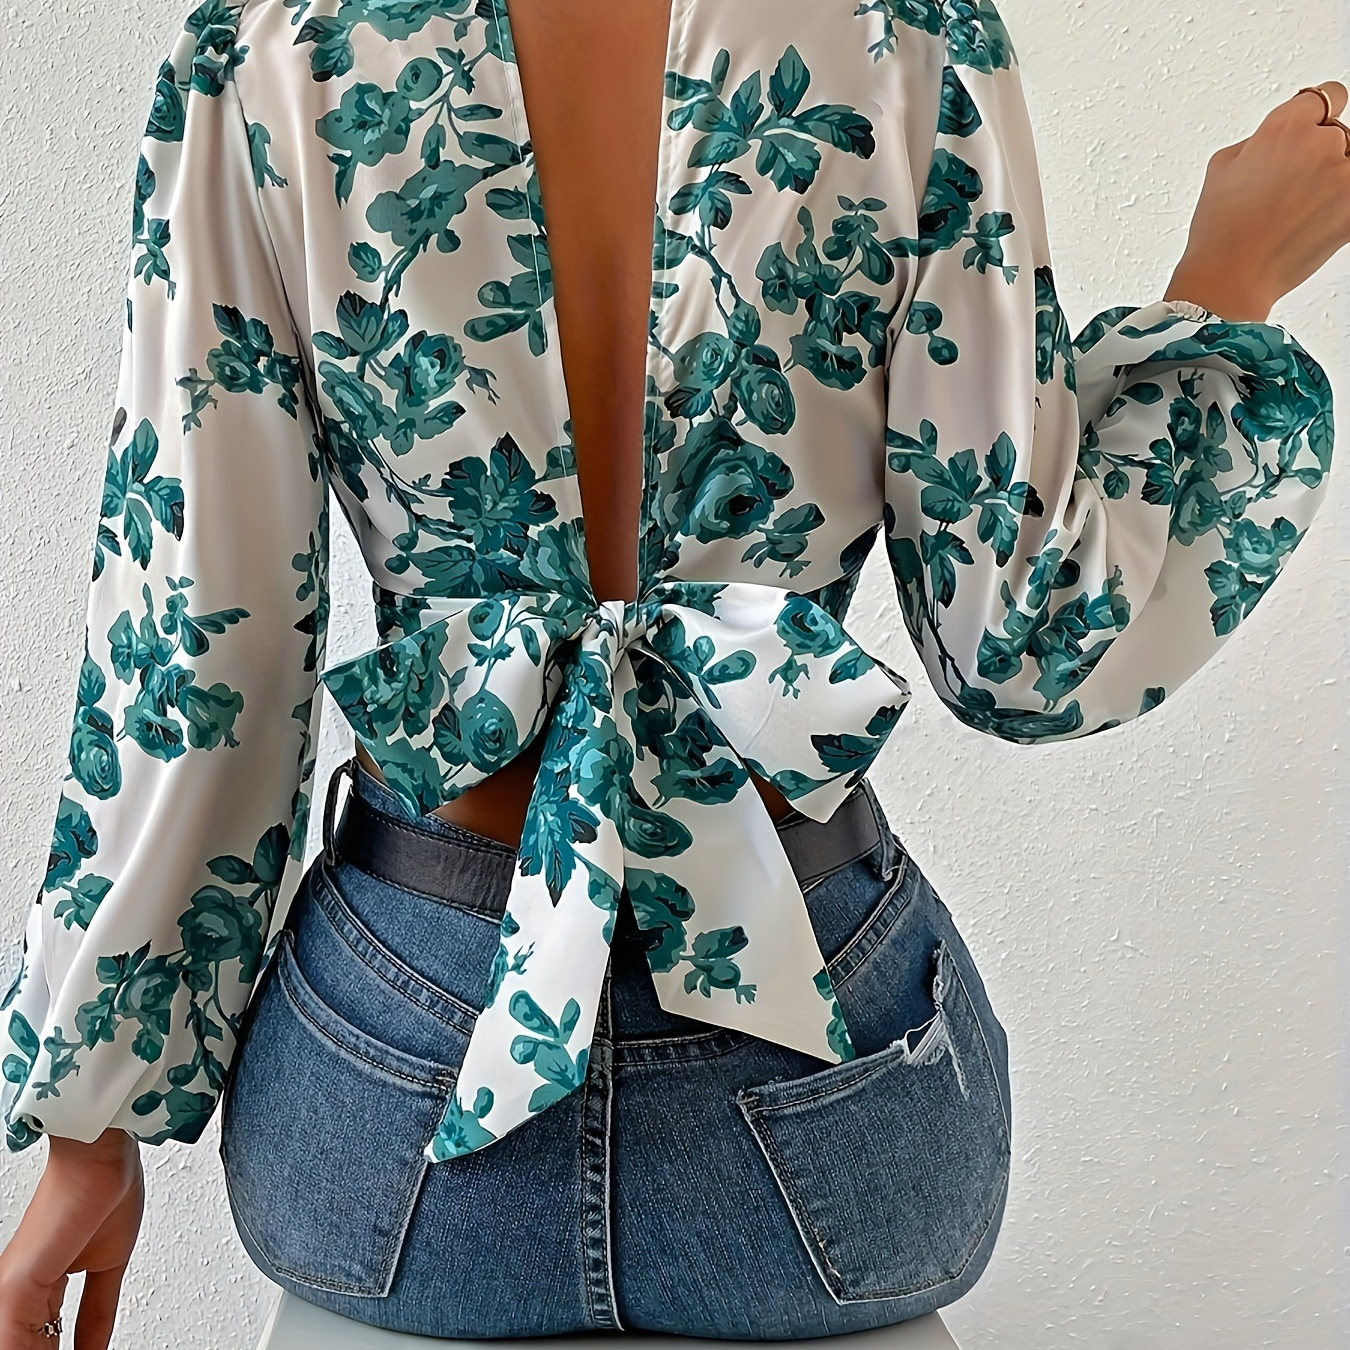 

Floral Print Tie Back Crop Blouse, Elegant Lantern Sleeve Cut Out Blouse For Spring & Fall, Women's Clothing